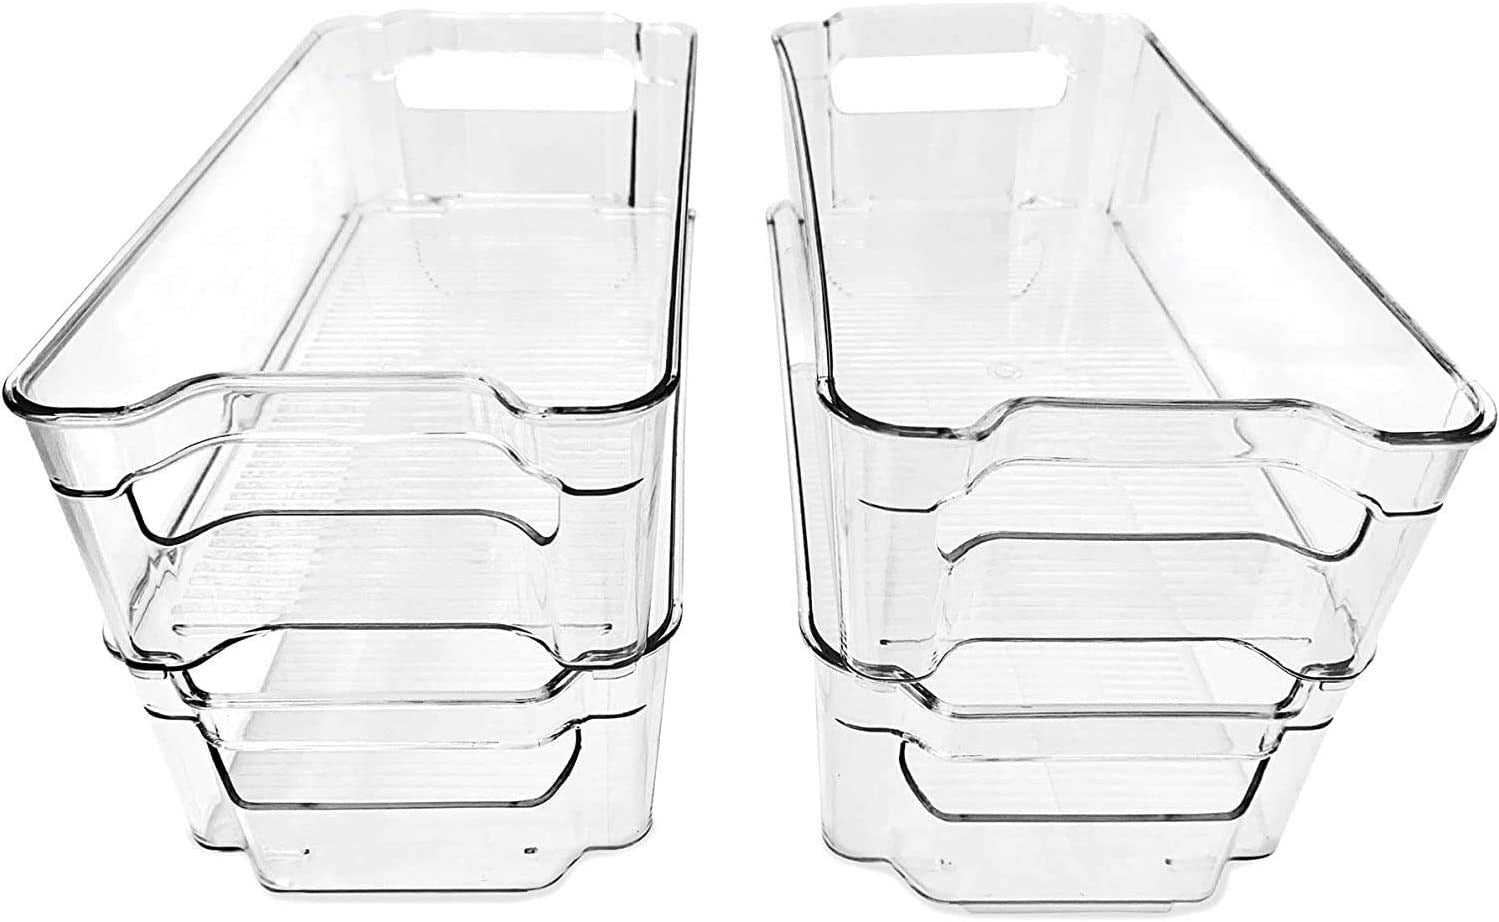 4 clear stackable fridge bins pictured